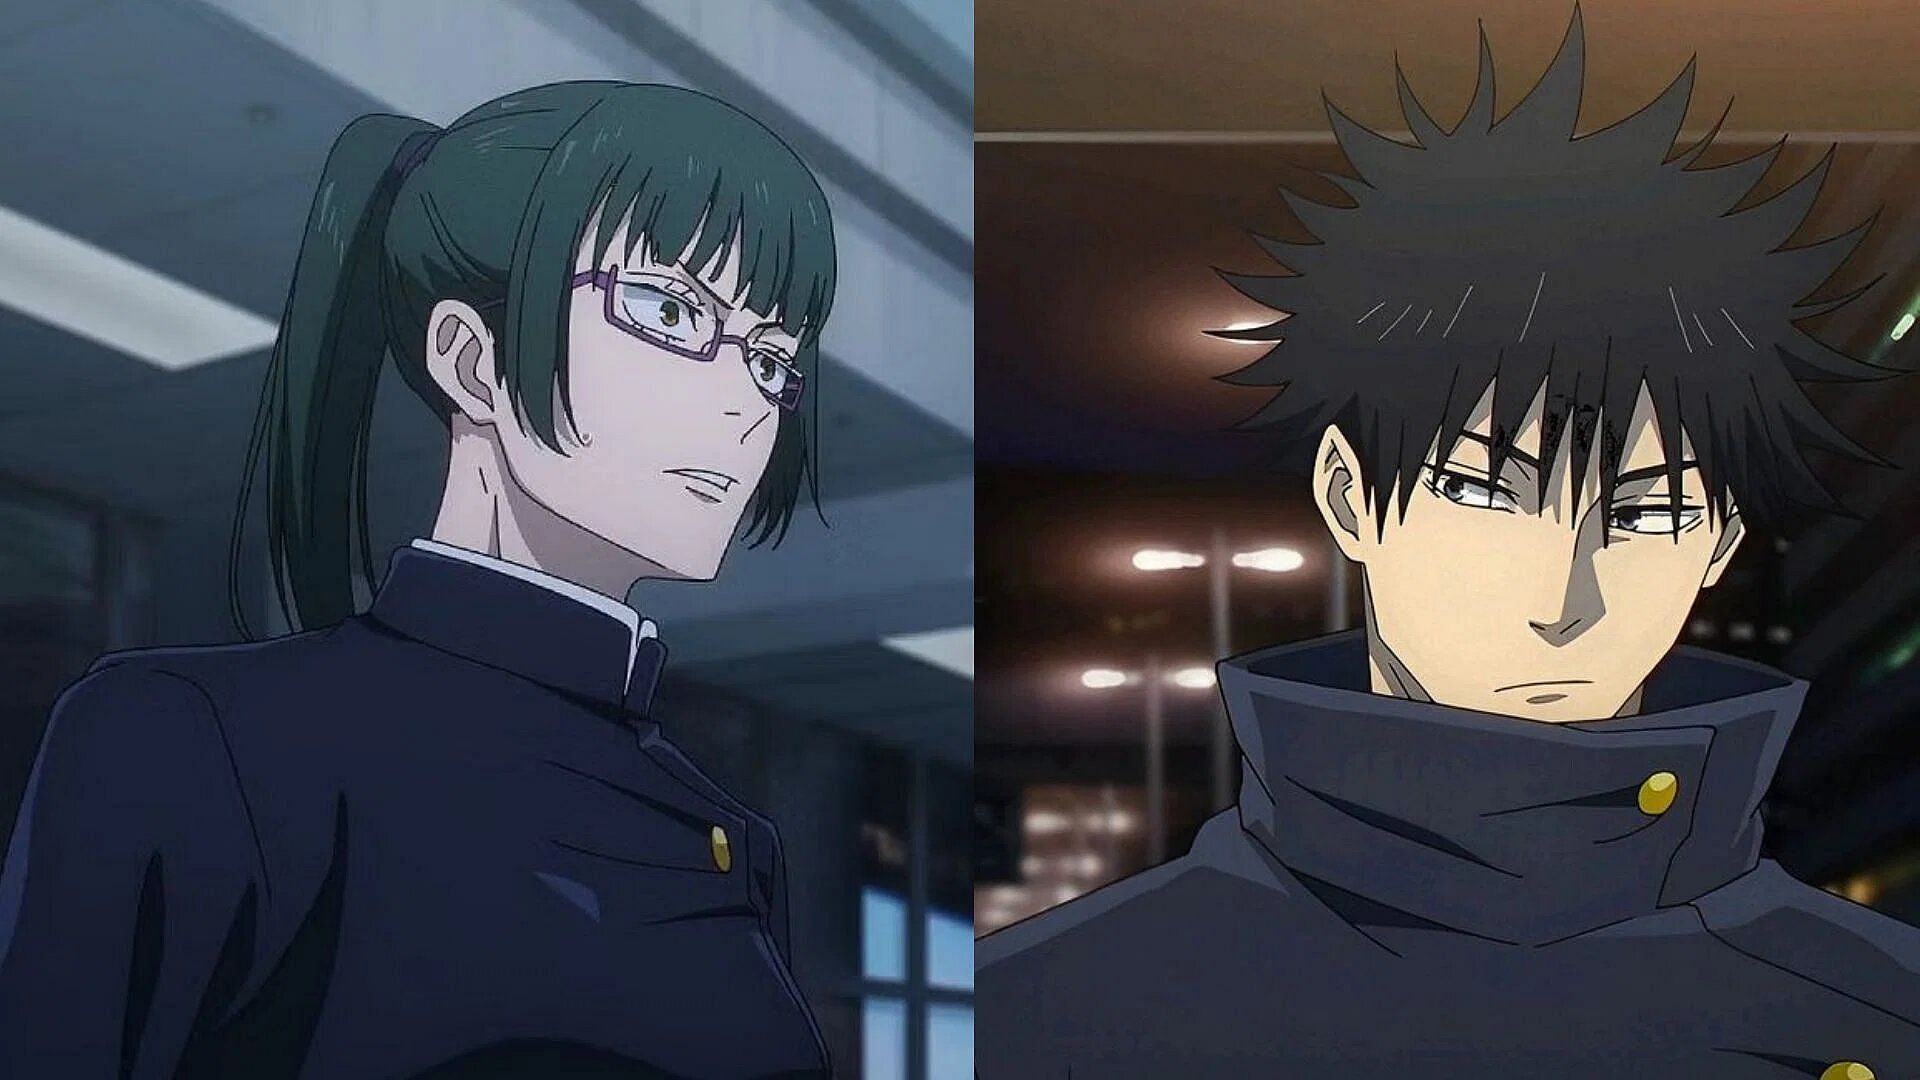 Jujutsu Kaisen chapter 252 and the role Maki and Megumi could play (Image via MAPPA).